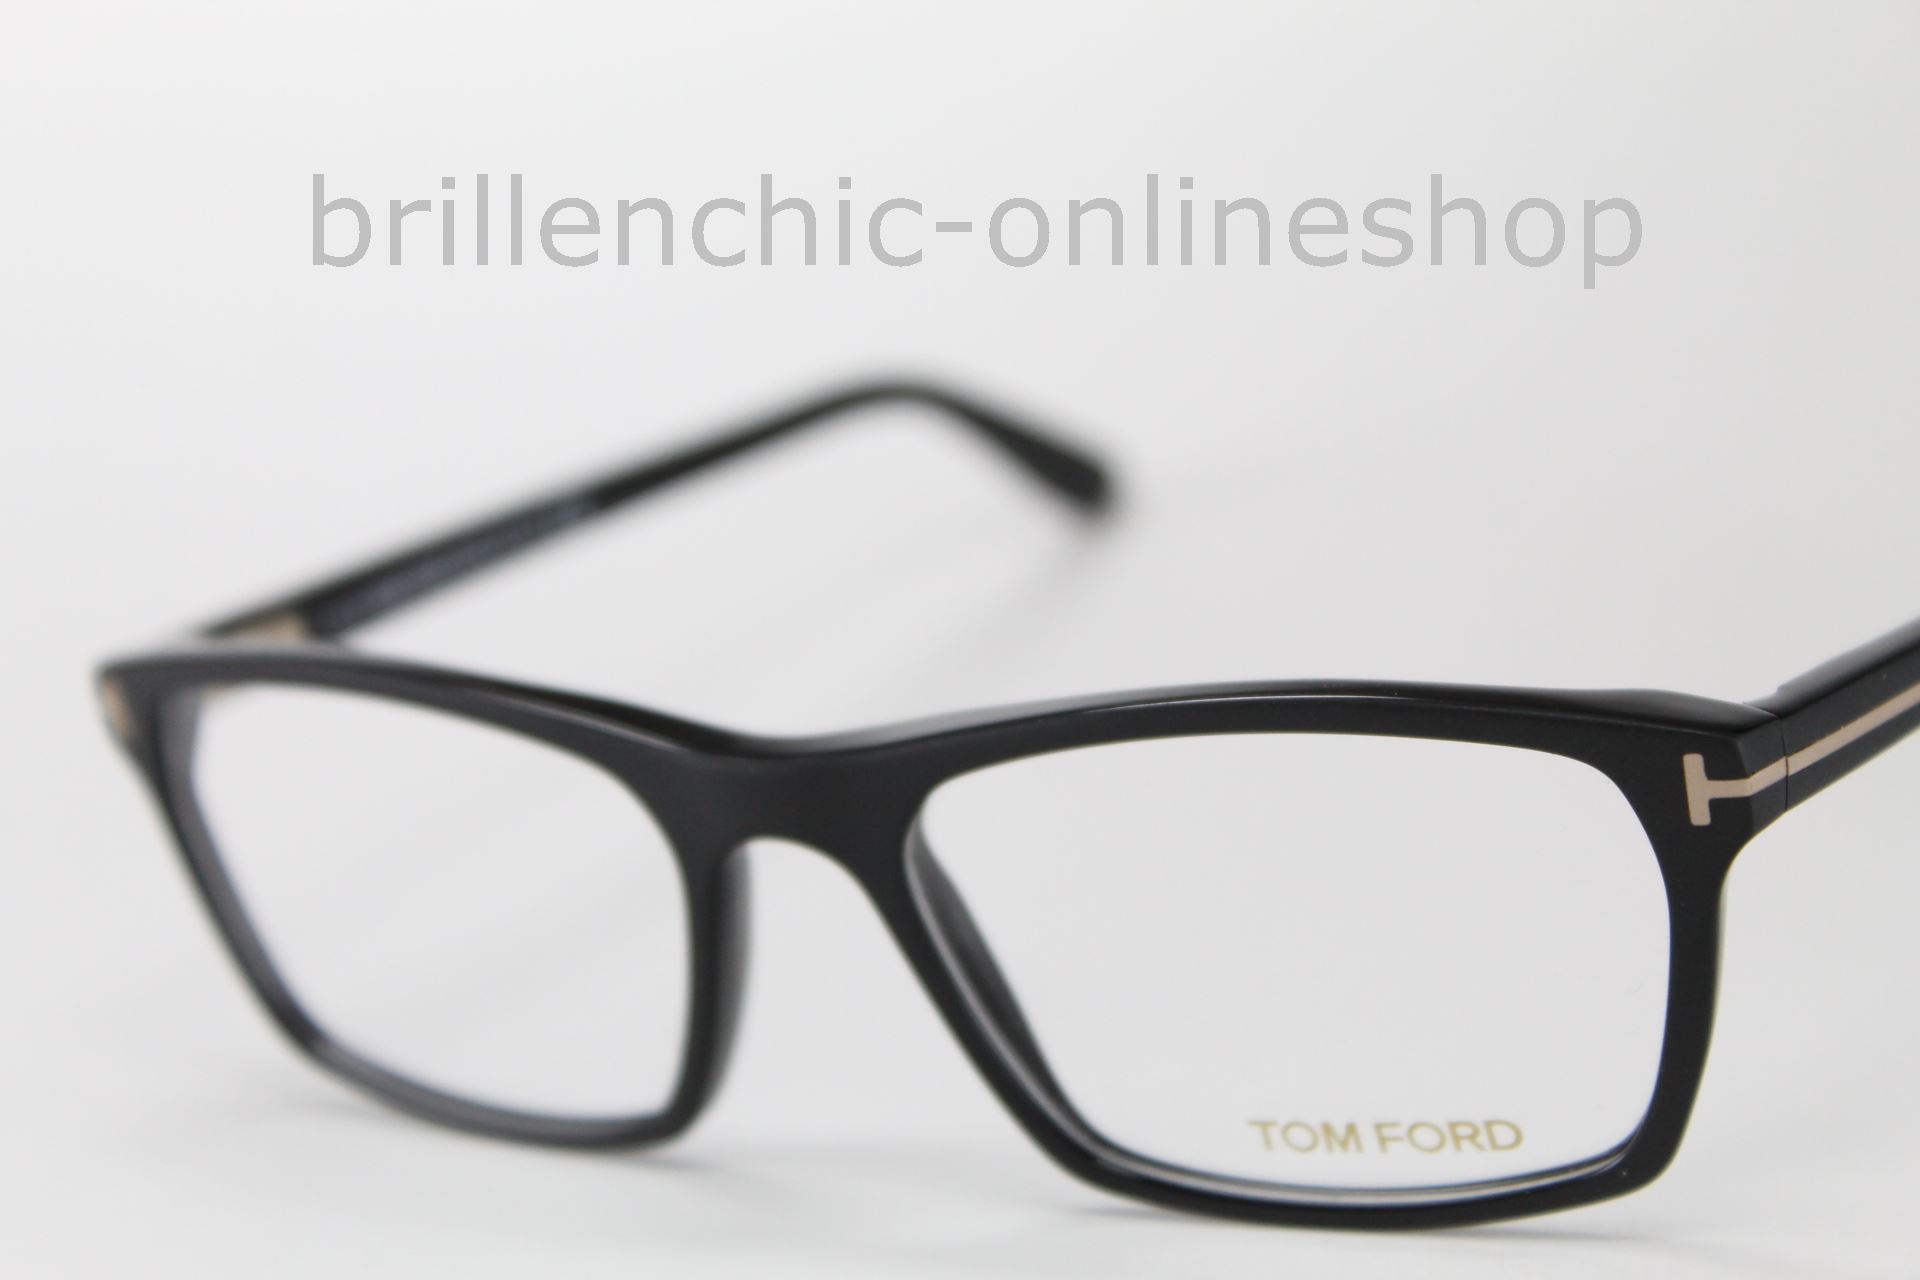 Brillenchic-onlineshop in Berlin - TOM FORD TF 5295 002 